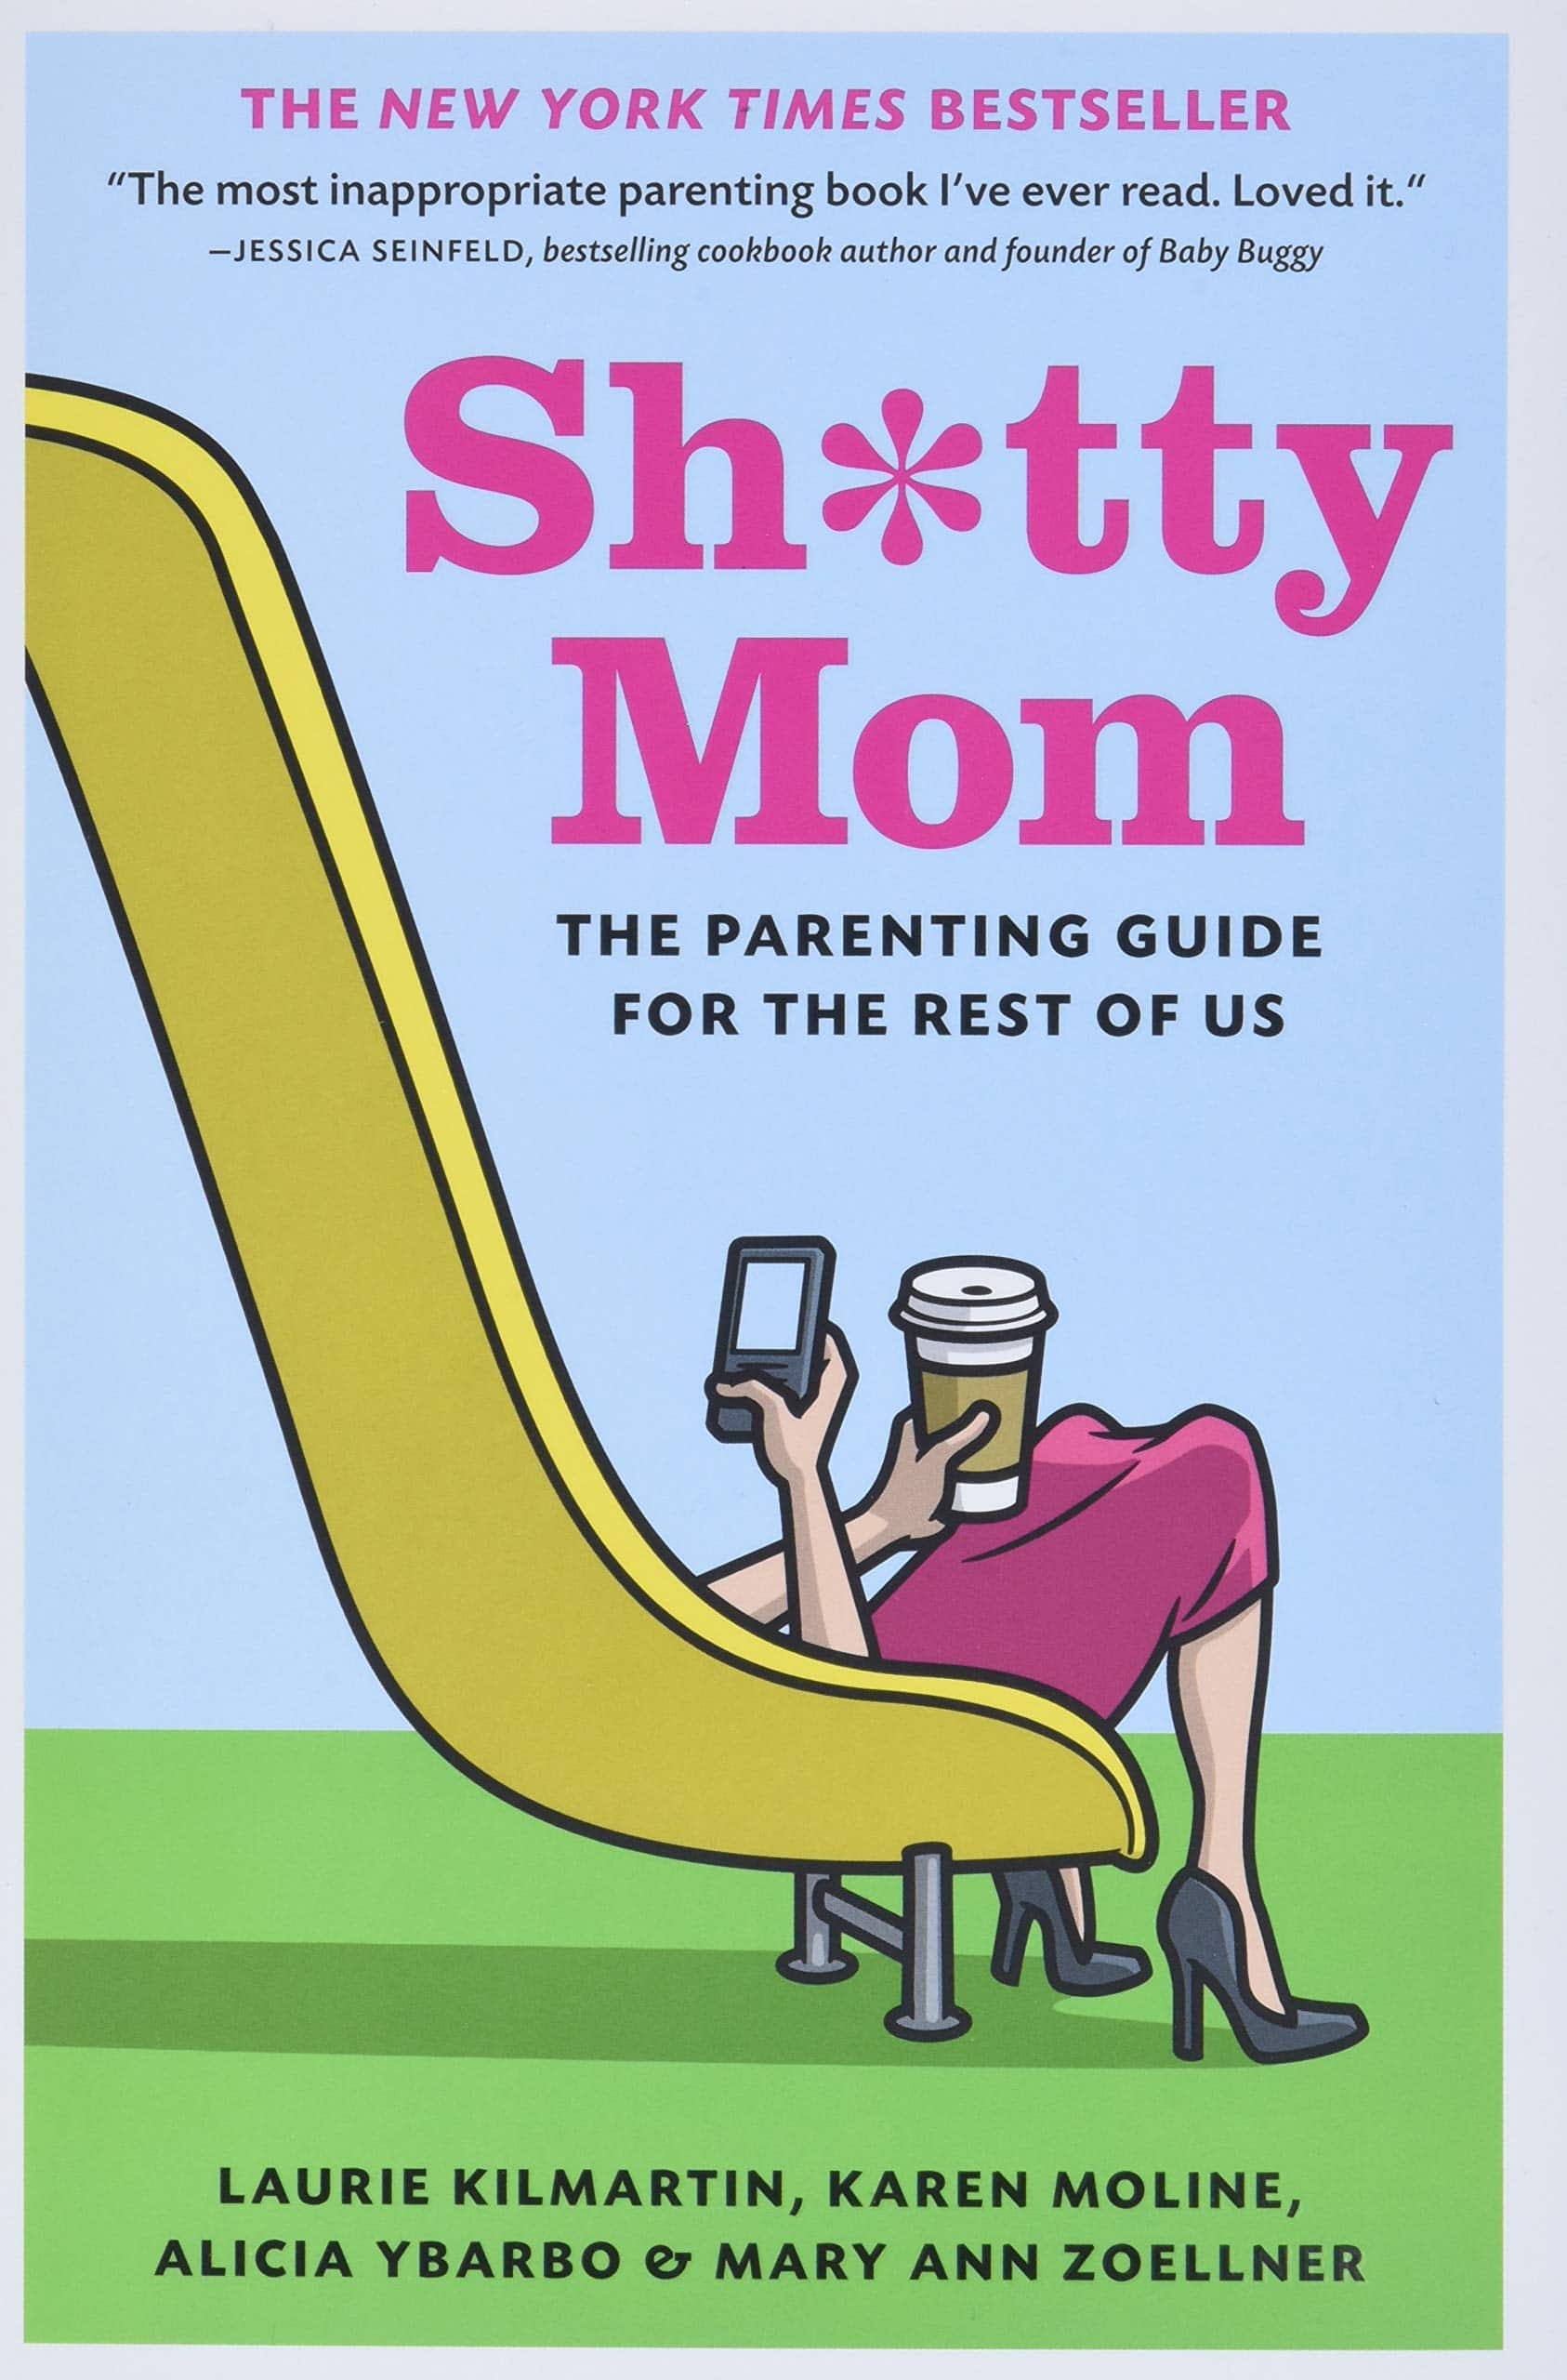 6 Books Every New Mother Should Read